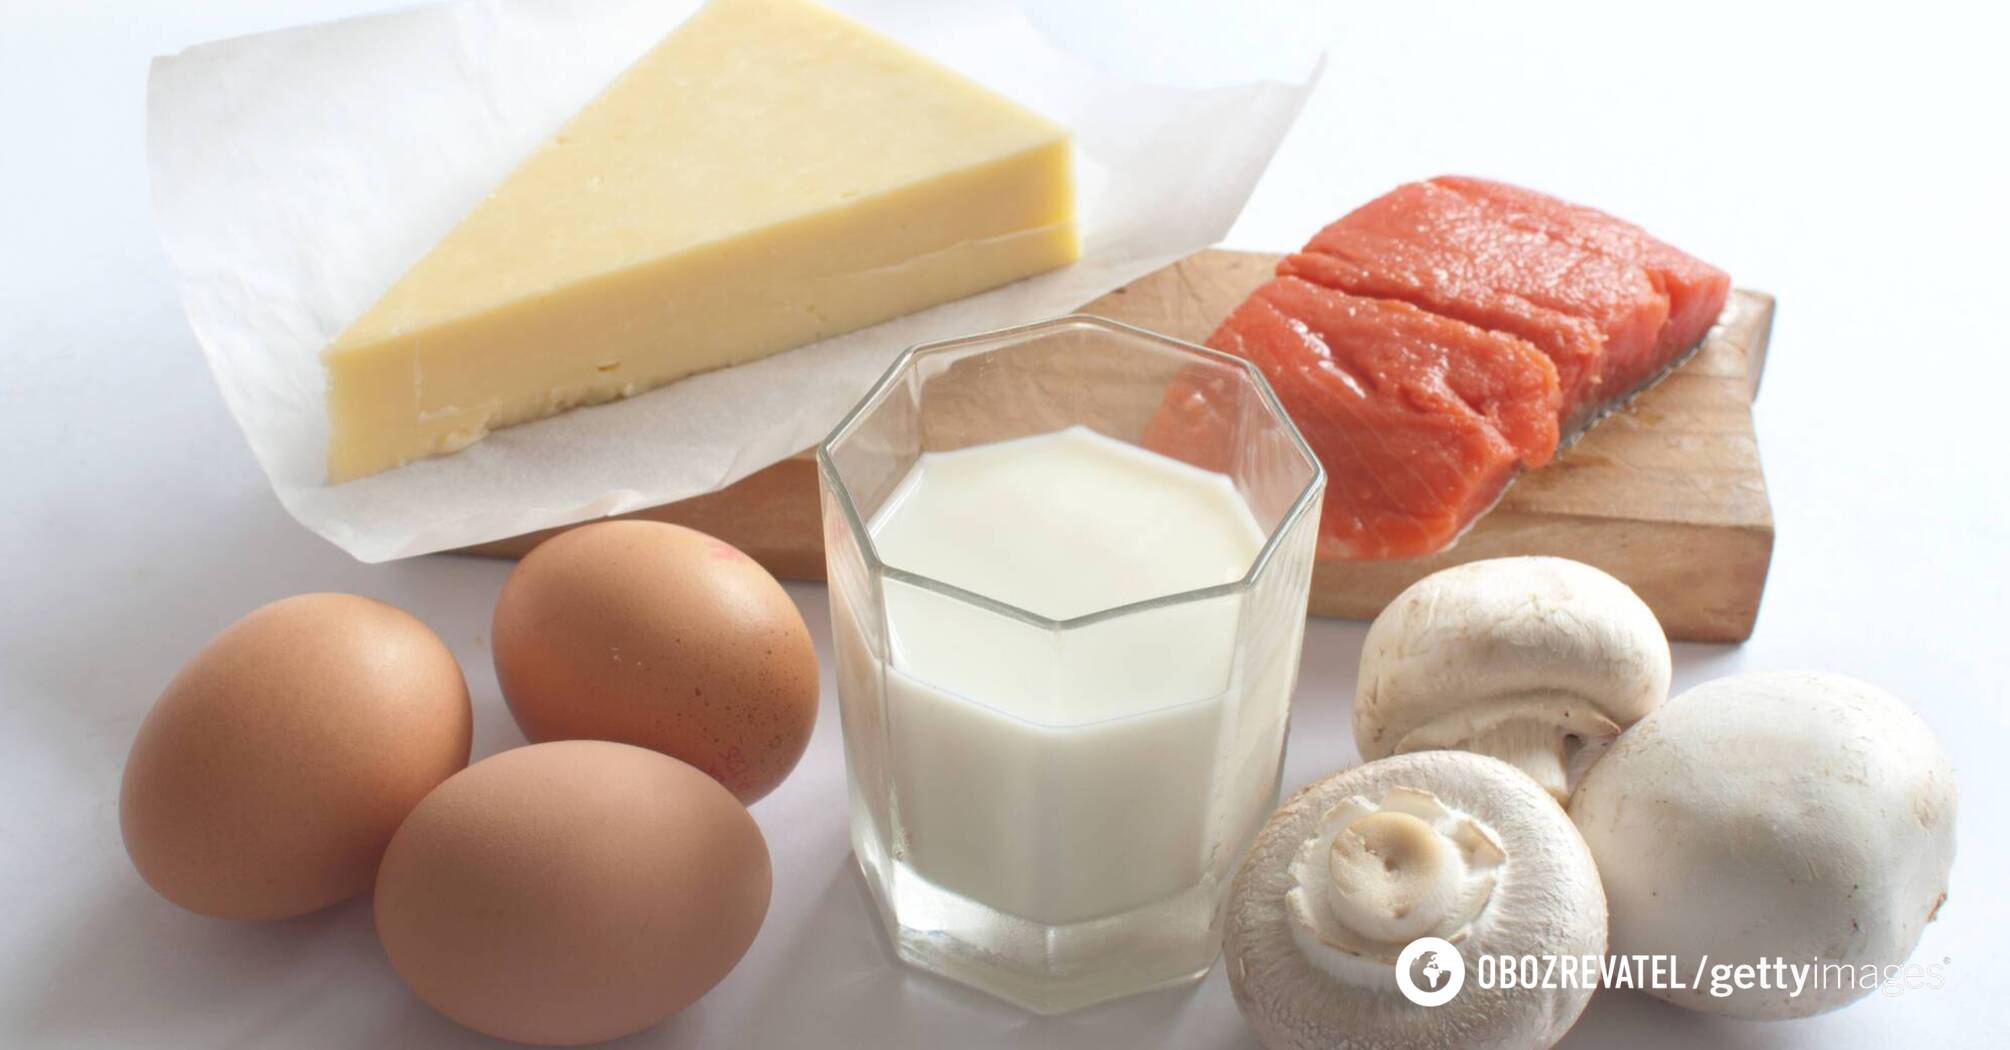 Vitamin D deficiency can lead to osteoporosis